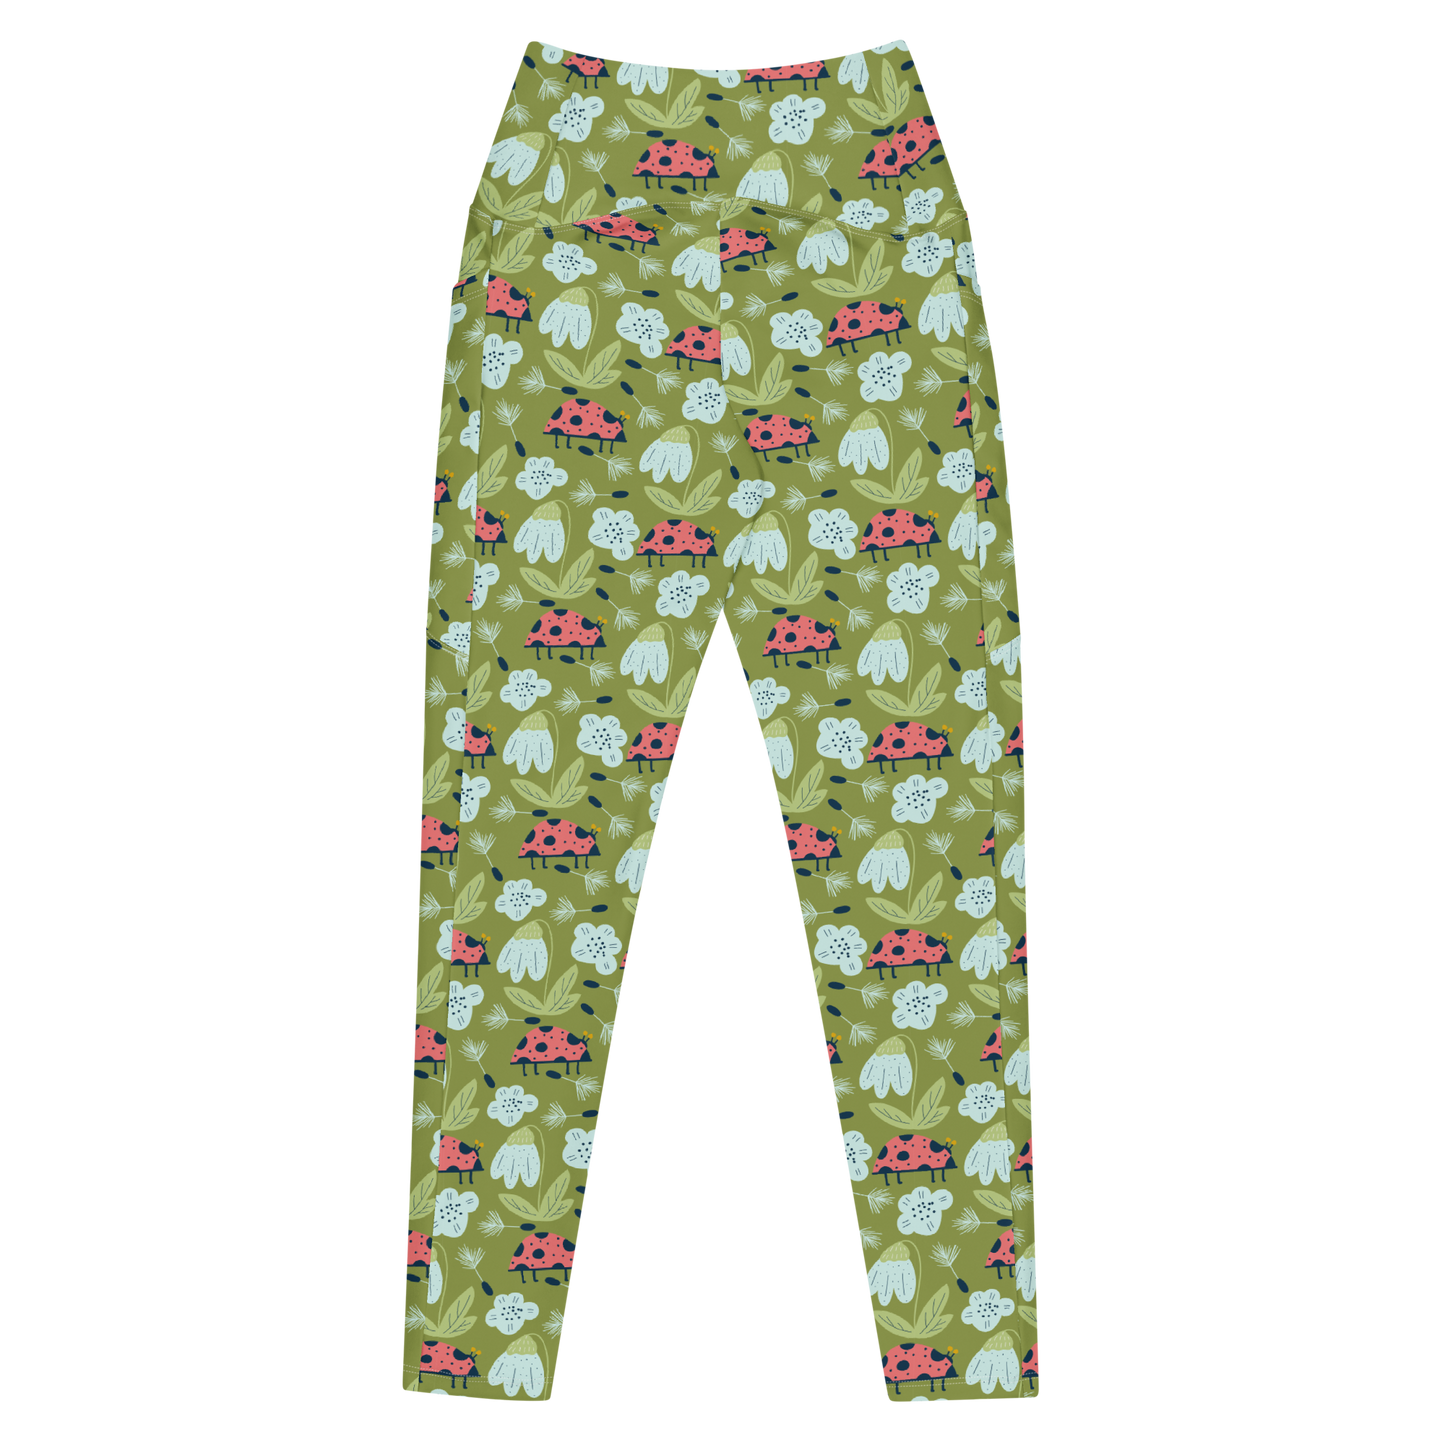 Scandinavian Spring Floral | Seamless Patterns | All-Over Print Leggings with Pockets - #5